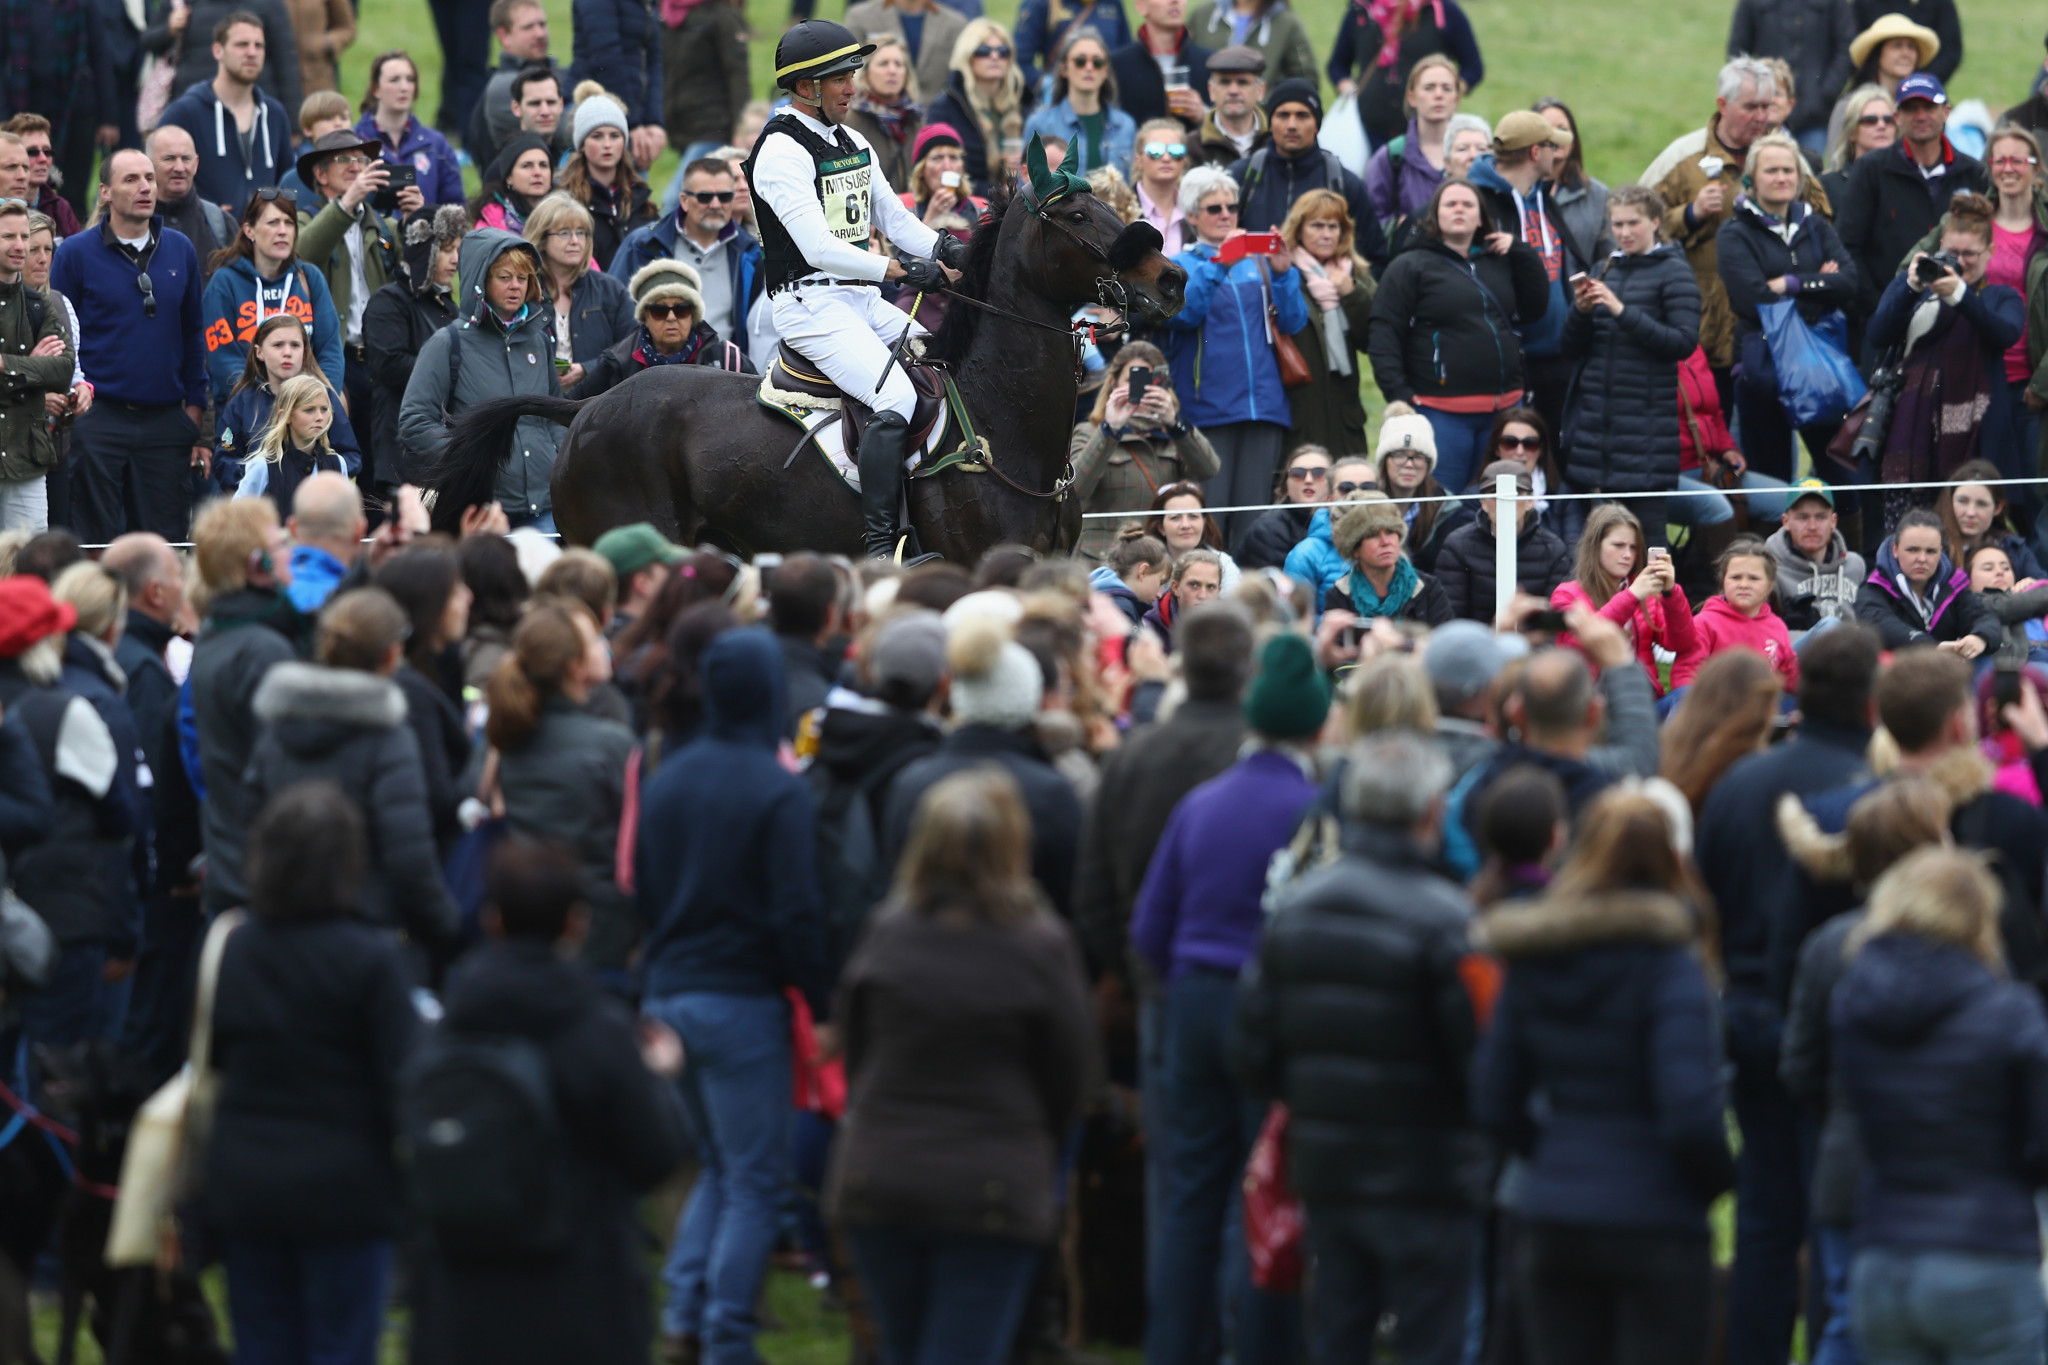 The Badminton Horse Trials, which traditionally attracts large crowds, has been cancelled for the second year in a row due to the coronavirus pandemic ©Getty Images